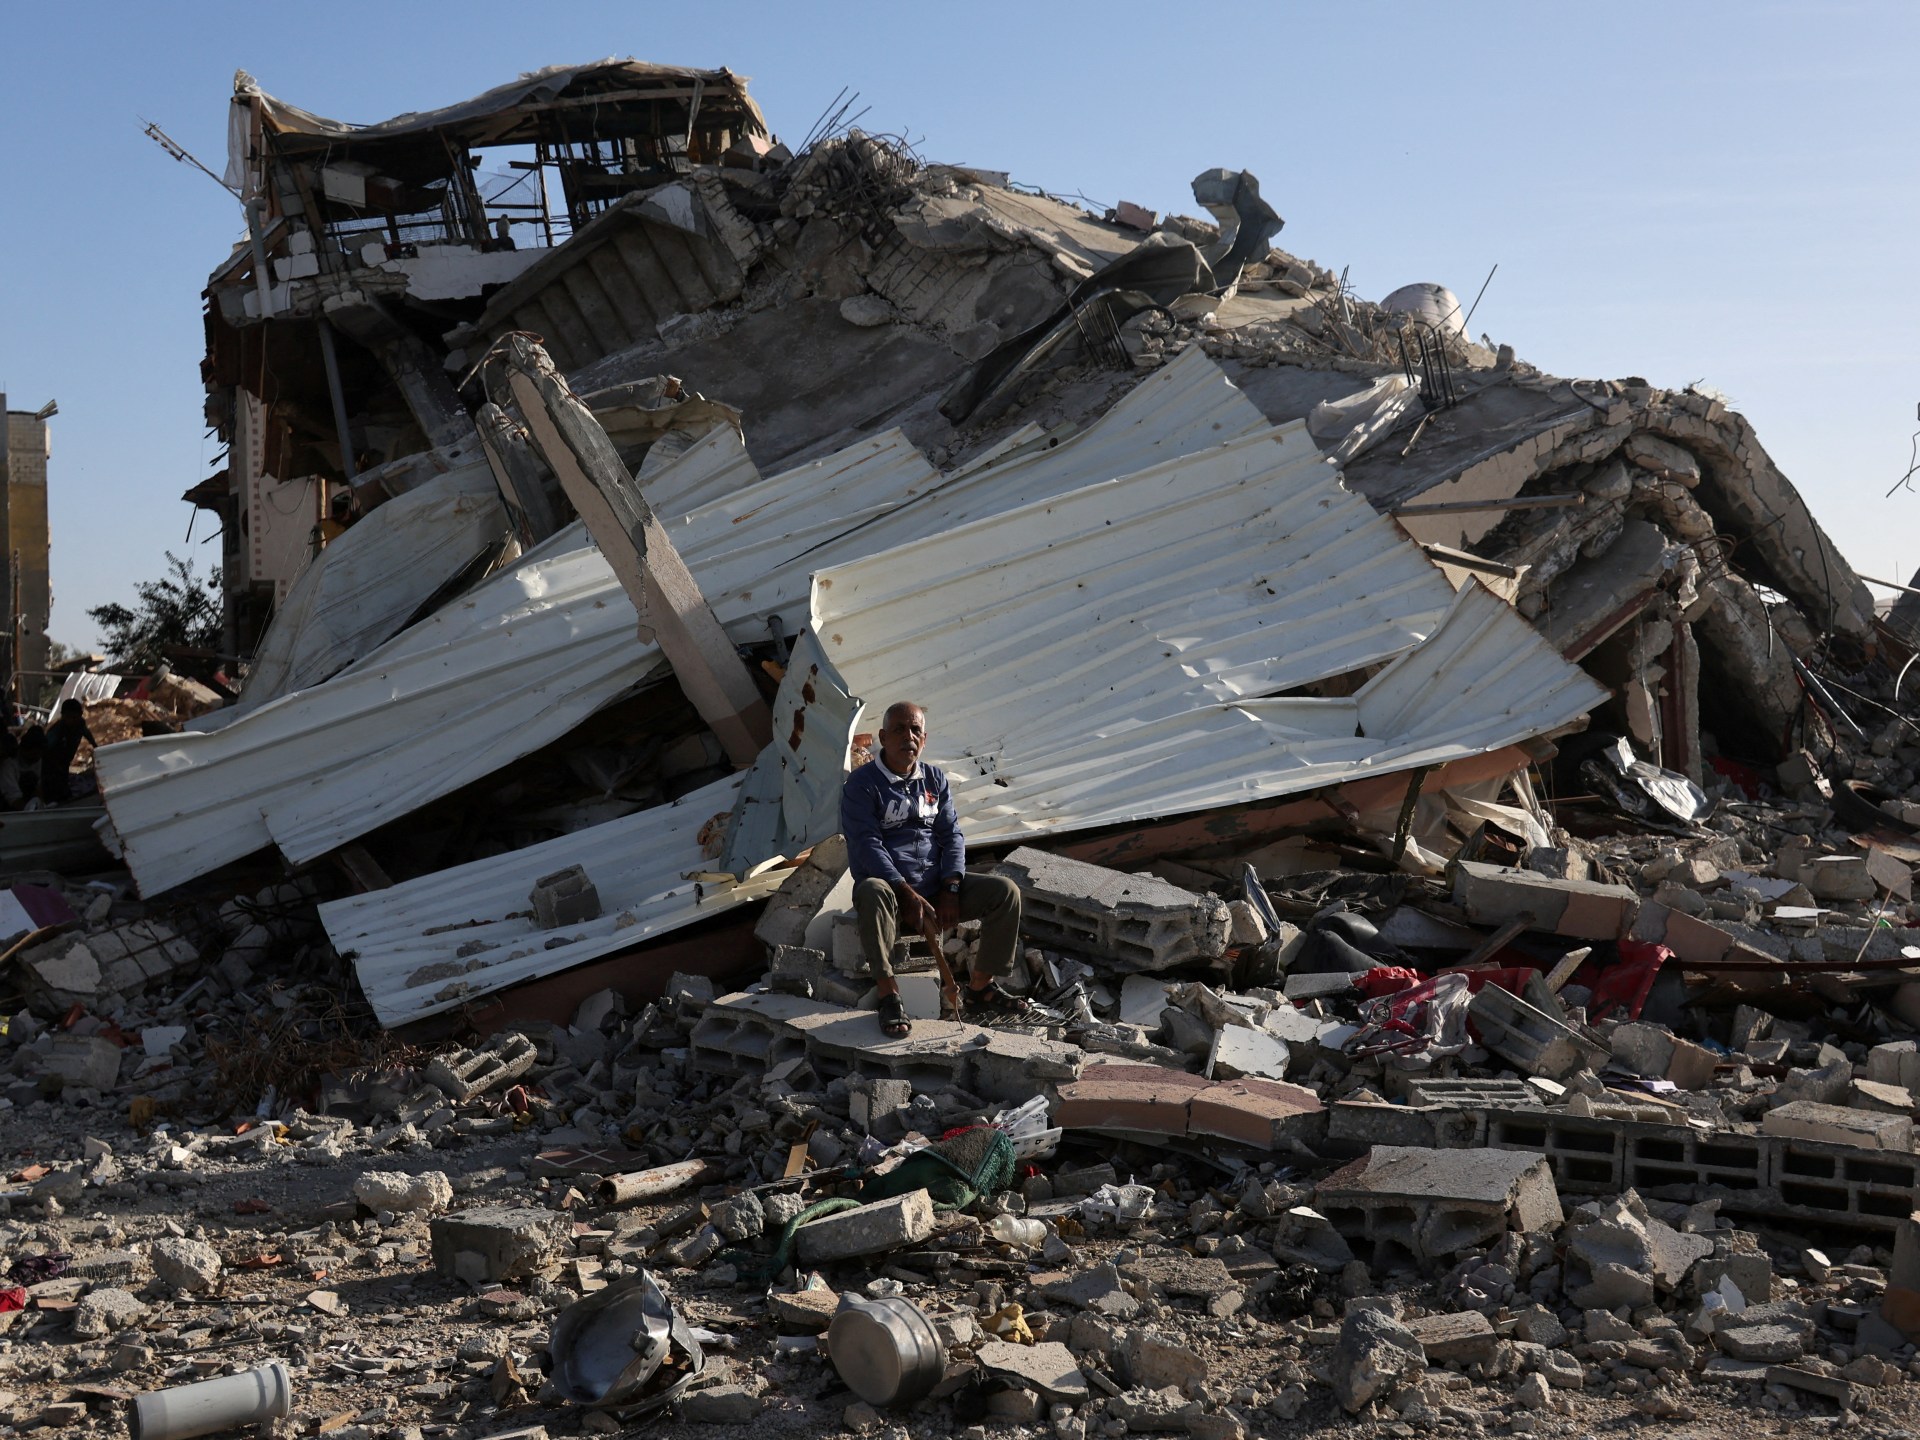 “Nothing stands”: Palestinians return to find destroyed homes in Gaza |  News on the Israeli-Palestinian conflict